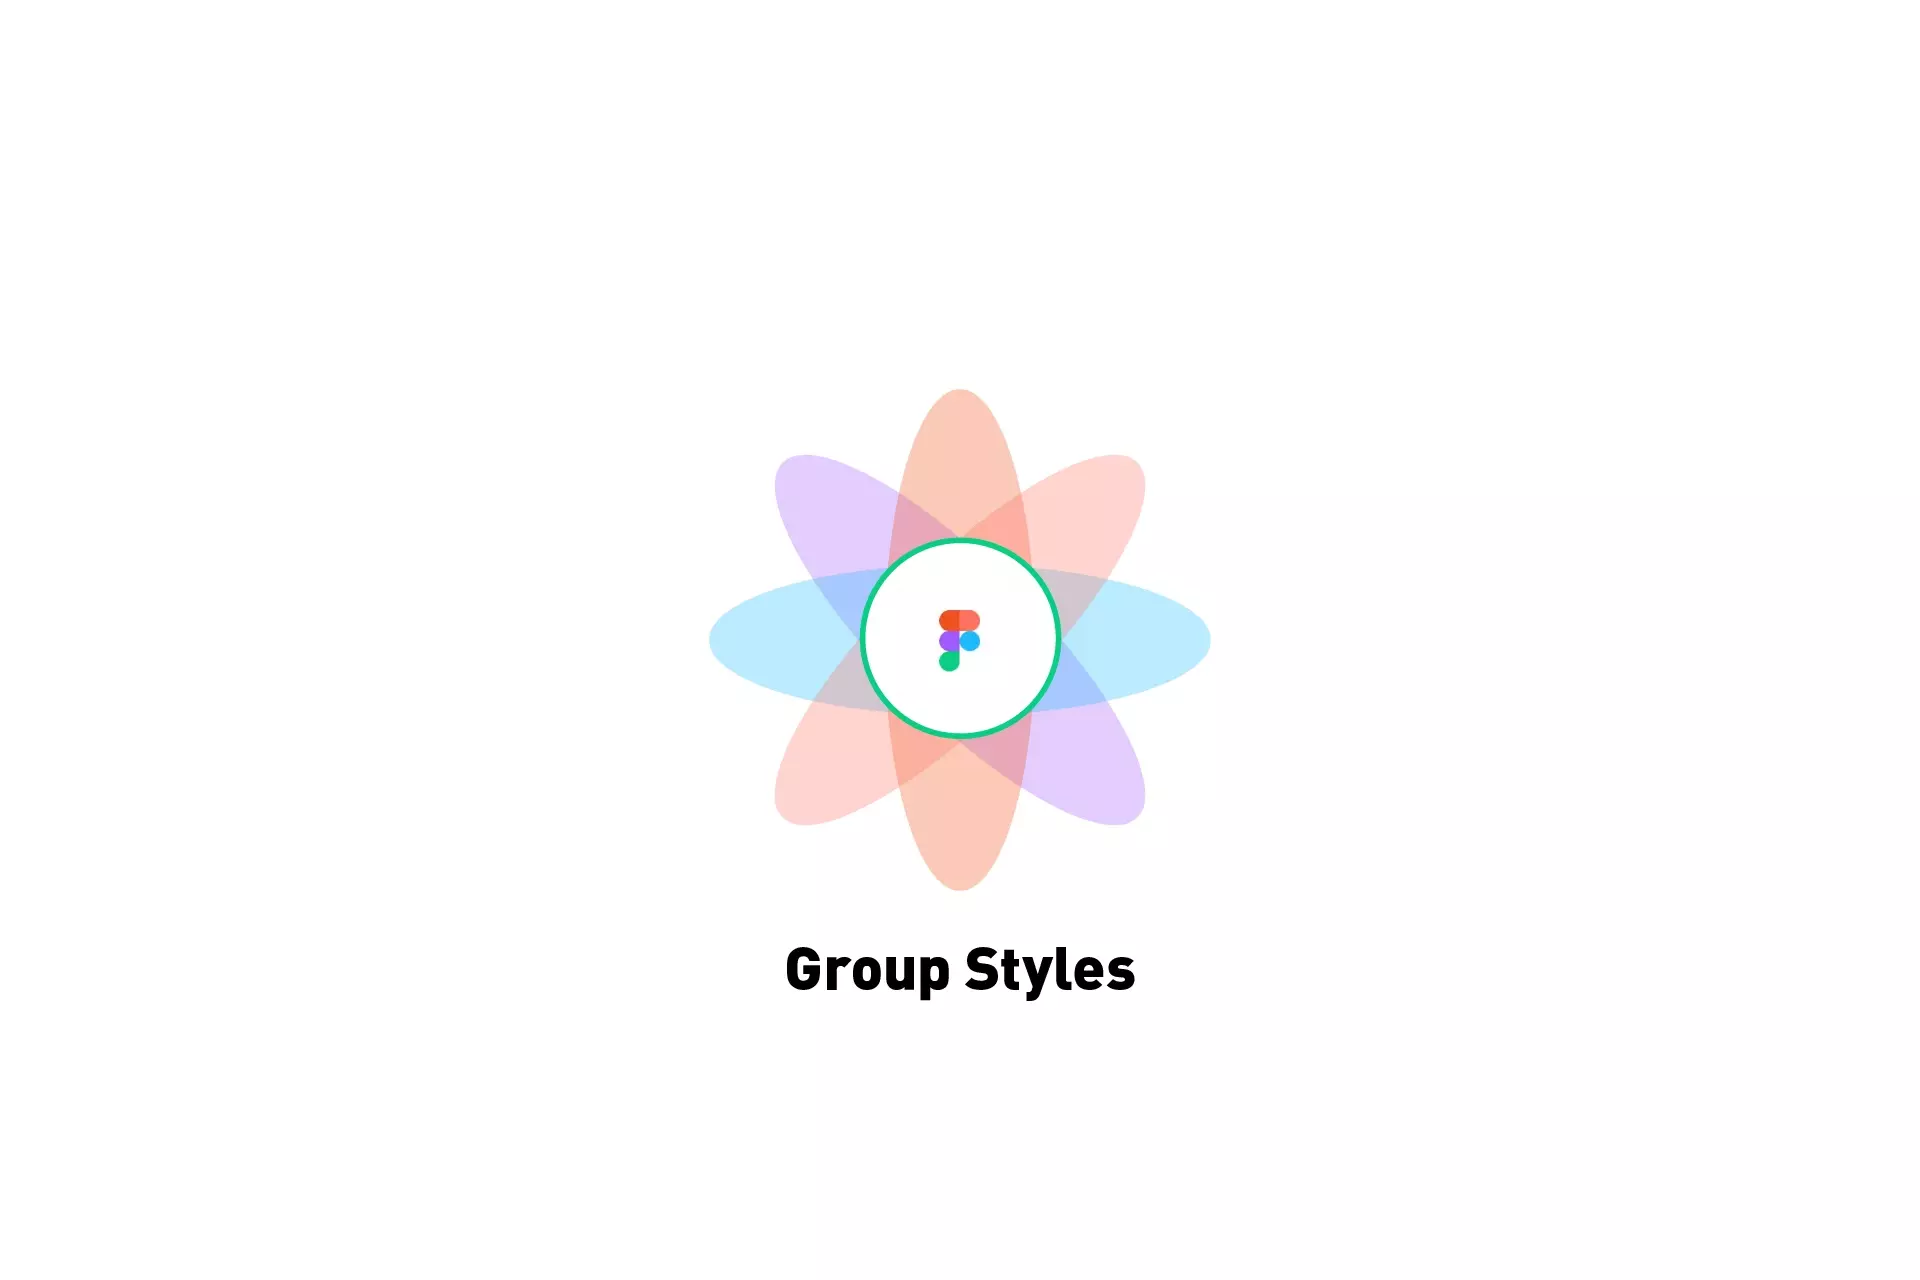 A flower that represents Figma with the text "Group Styles" beneath it.